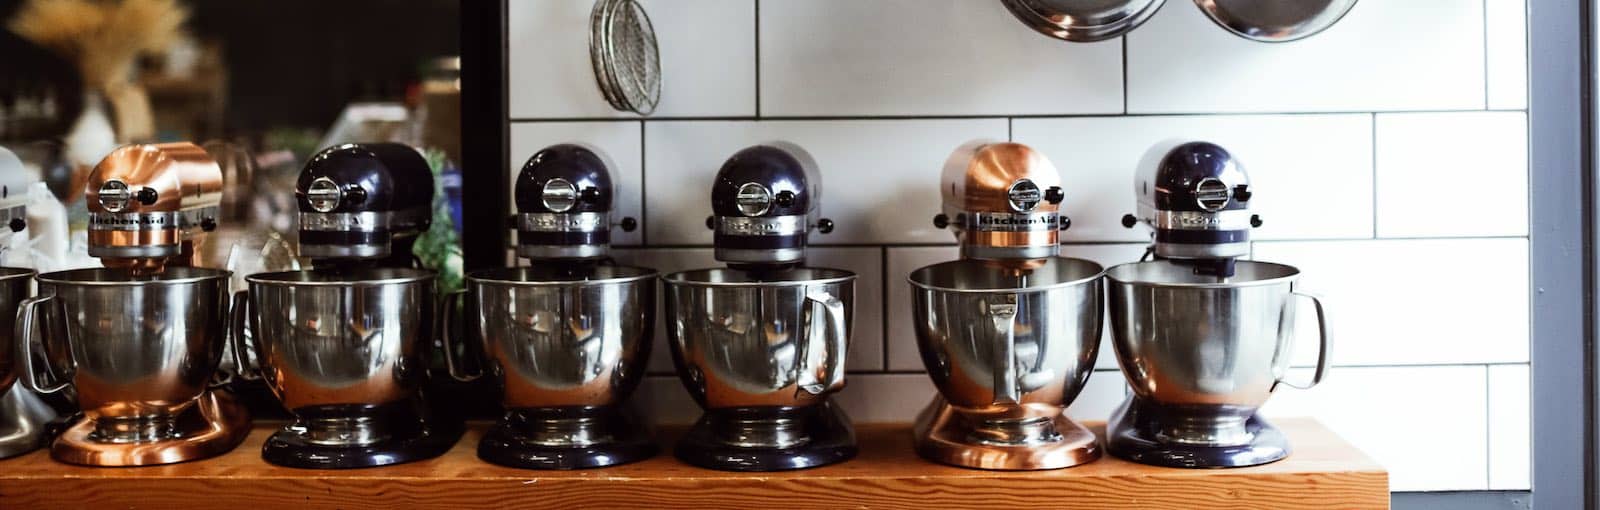 row of metal stand mixers